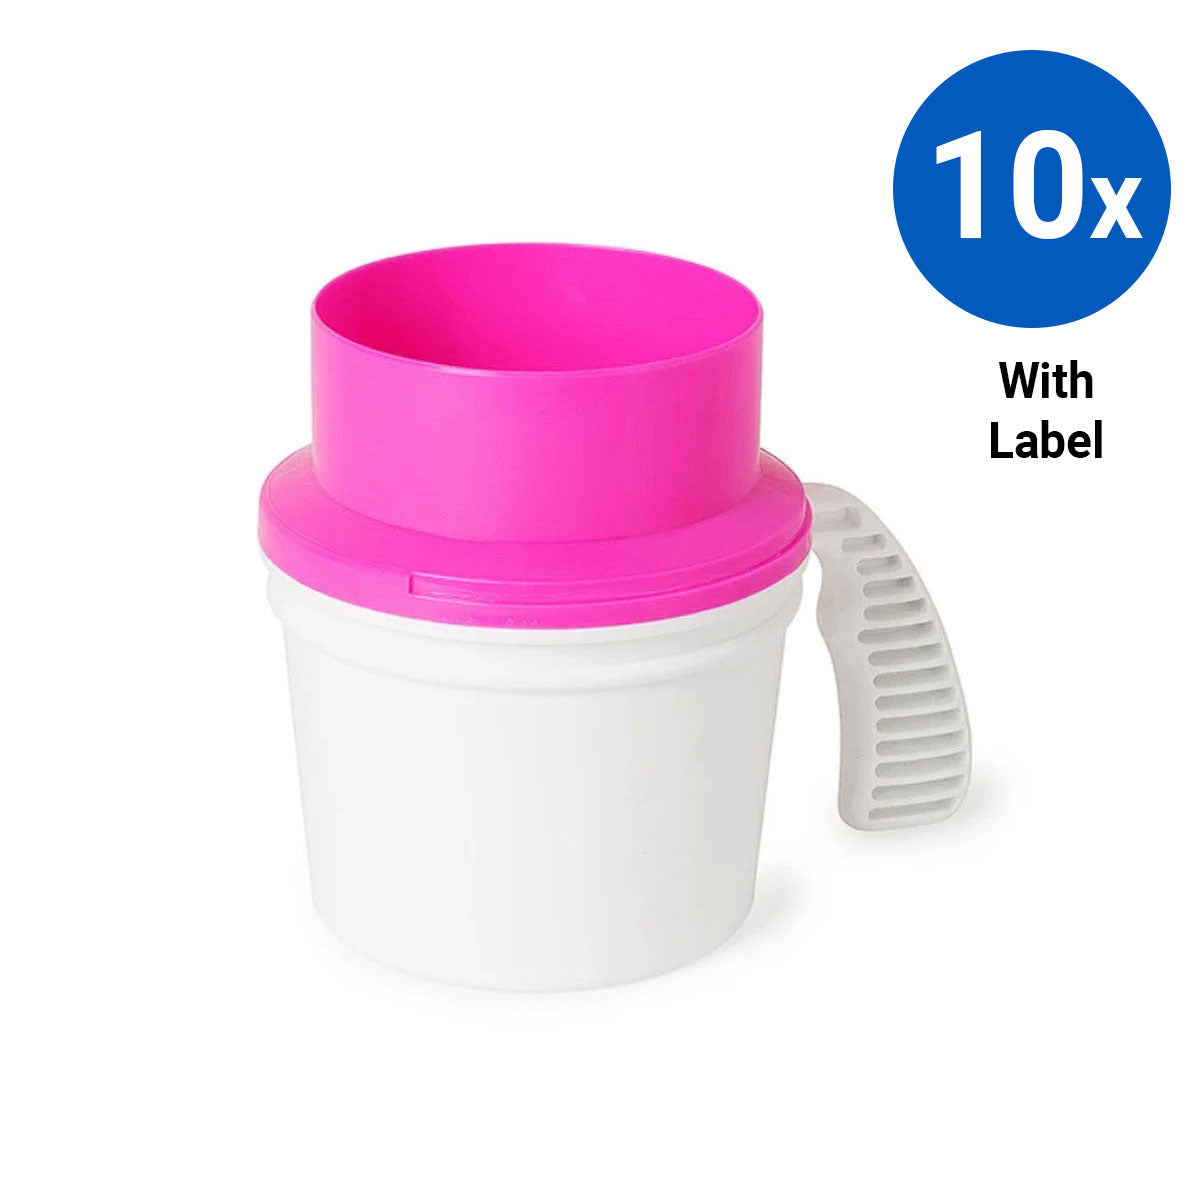 10x Collection Container Base and Quick Drop Lid with Labels - Pink